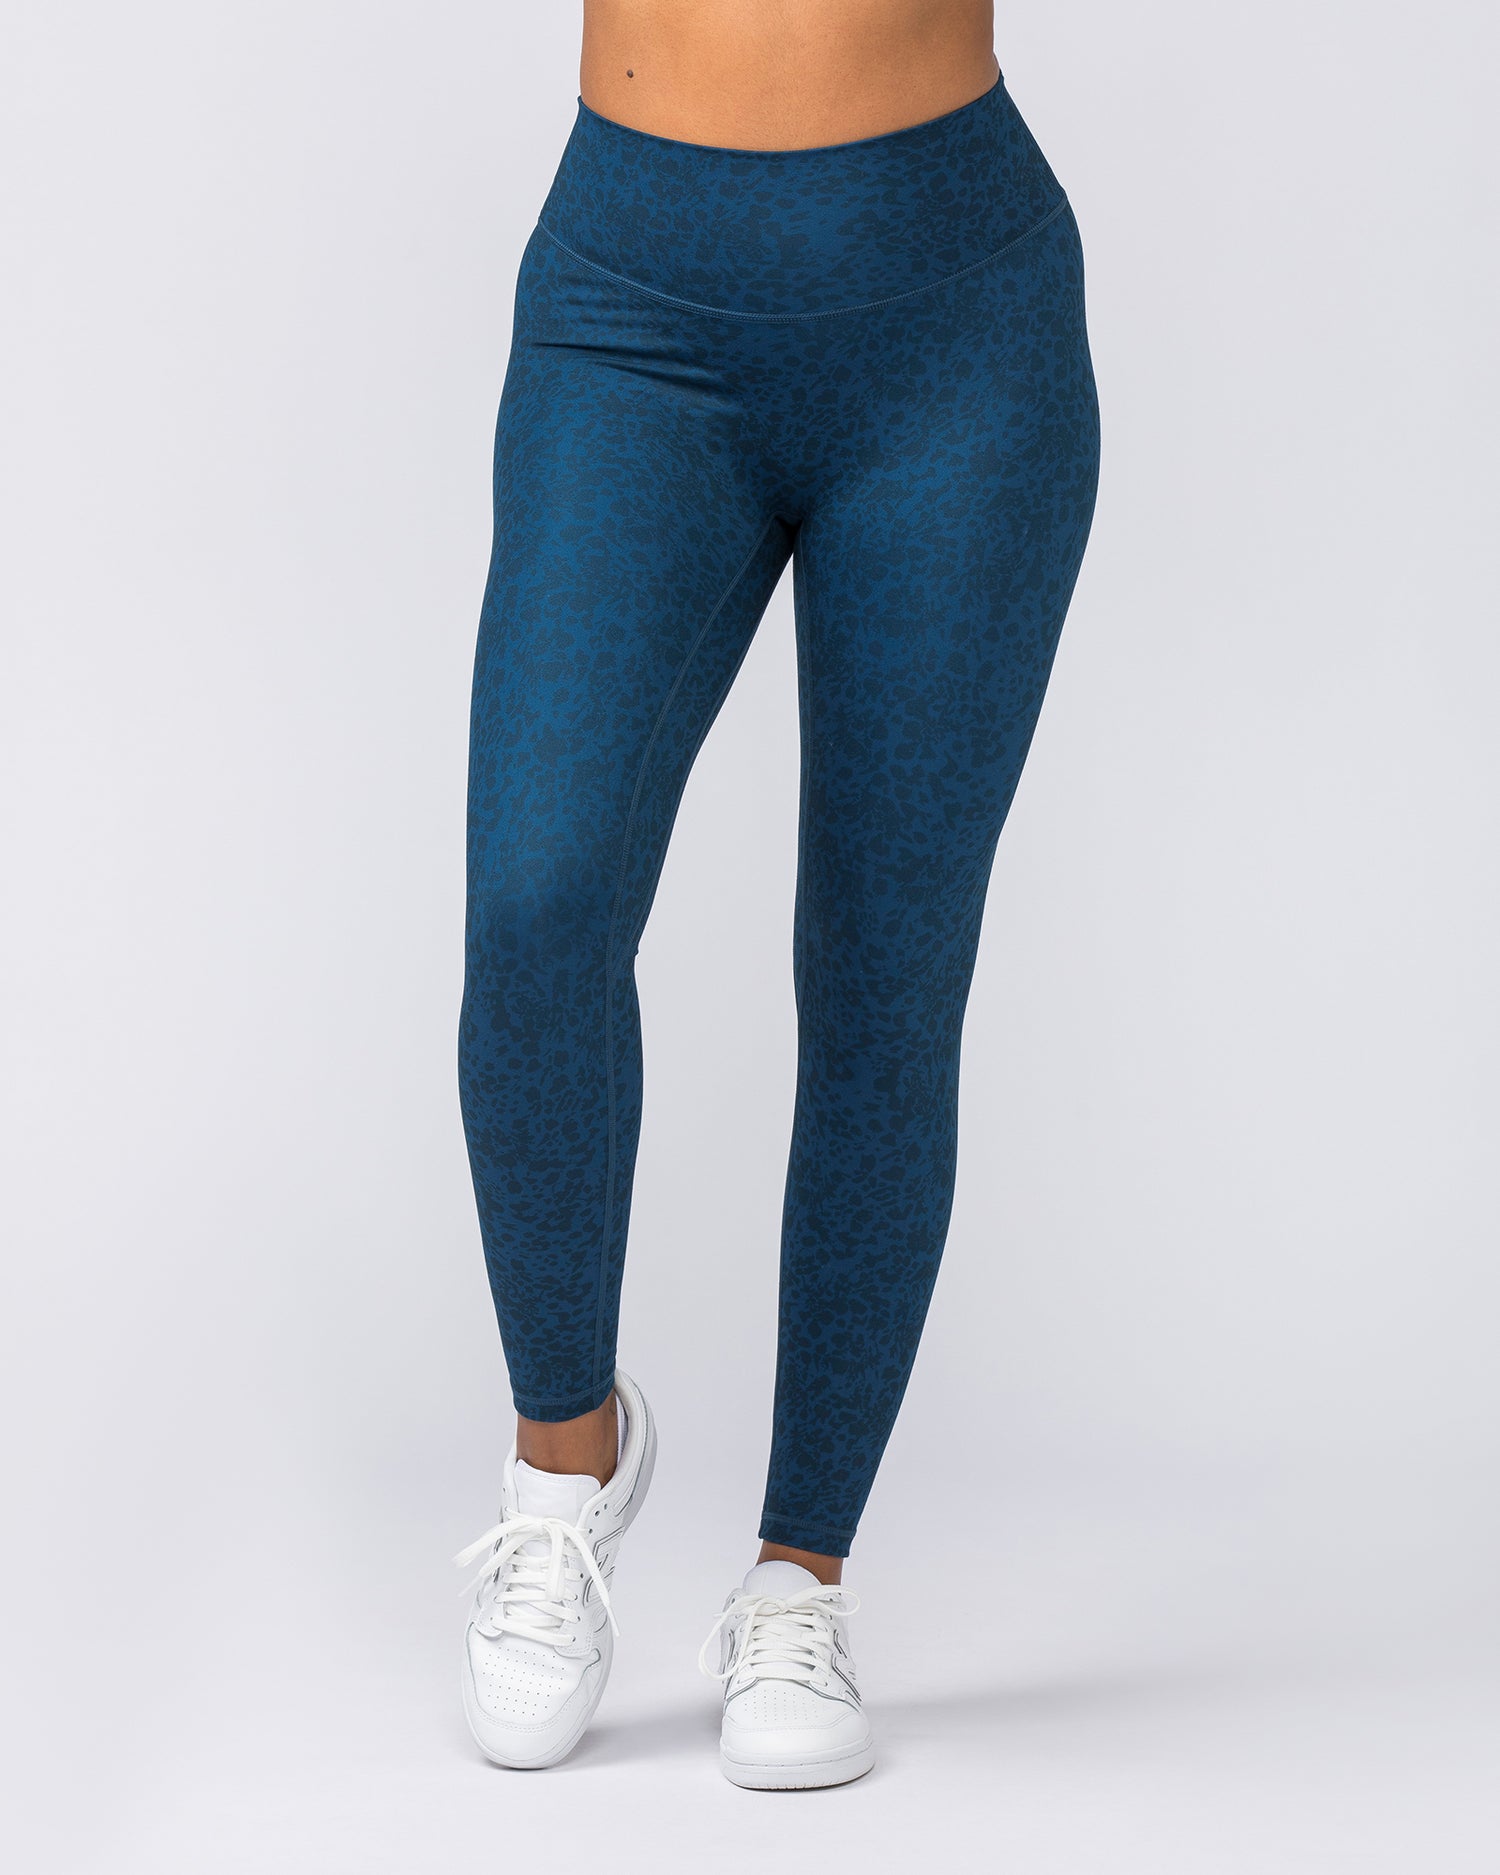 Zero Rise Everyday Ankle Length Leggings - Pacific Abstract Print